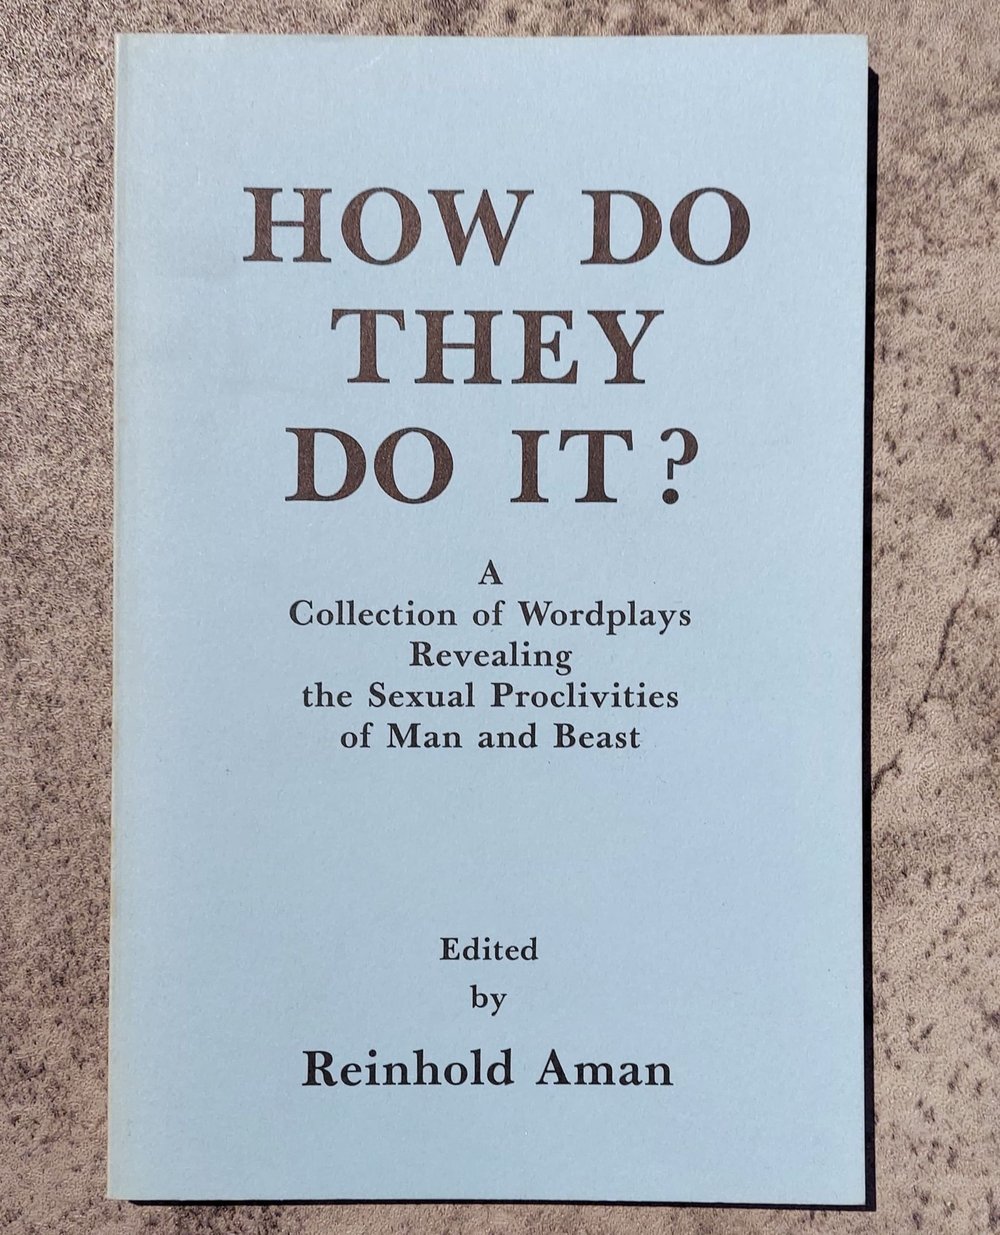 How Do They Do It? A Collection of Wordplays Revealing the Sexual Proclivities of Man and Beast